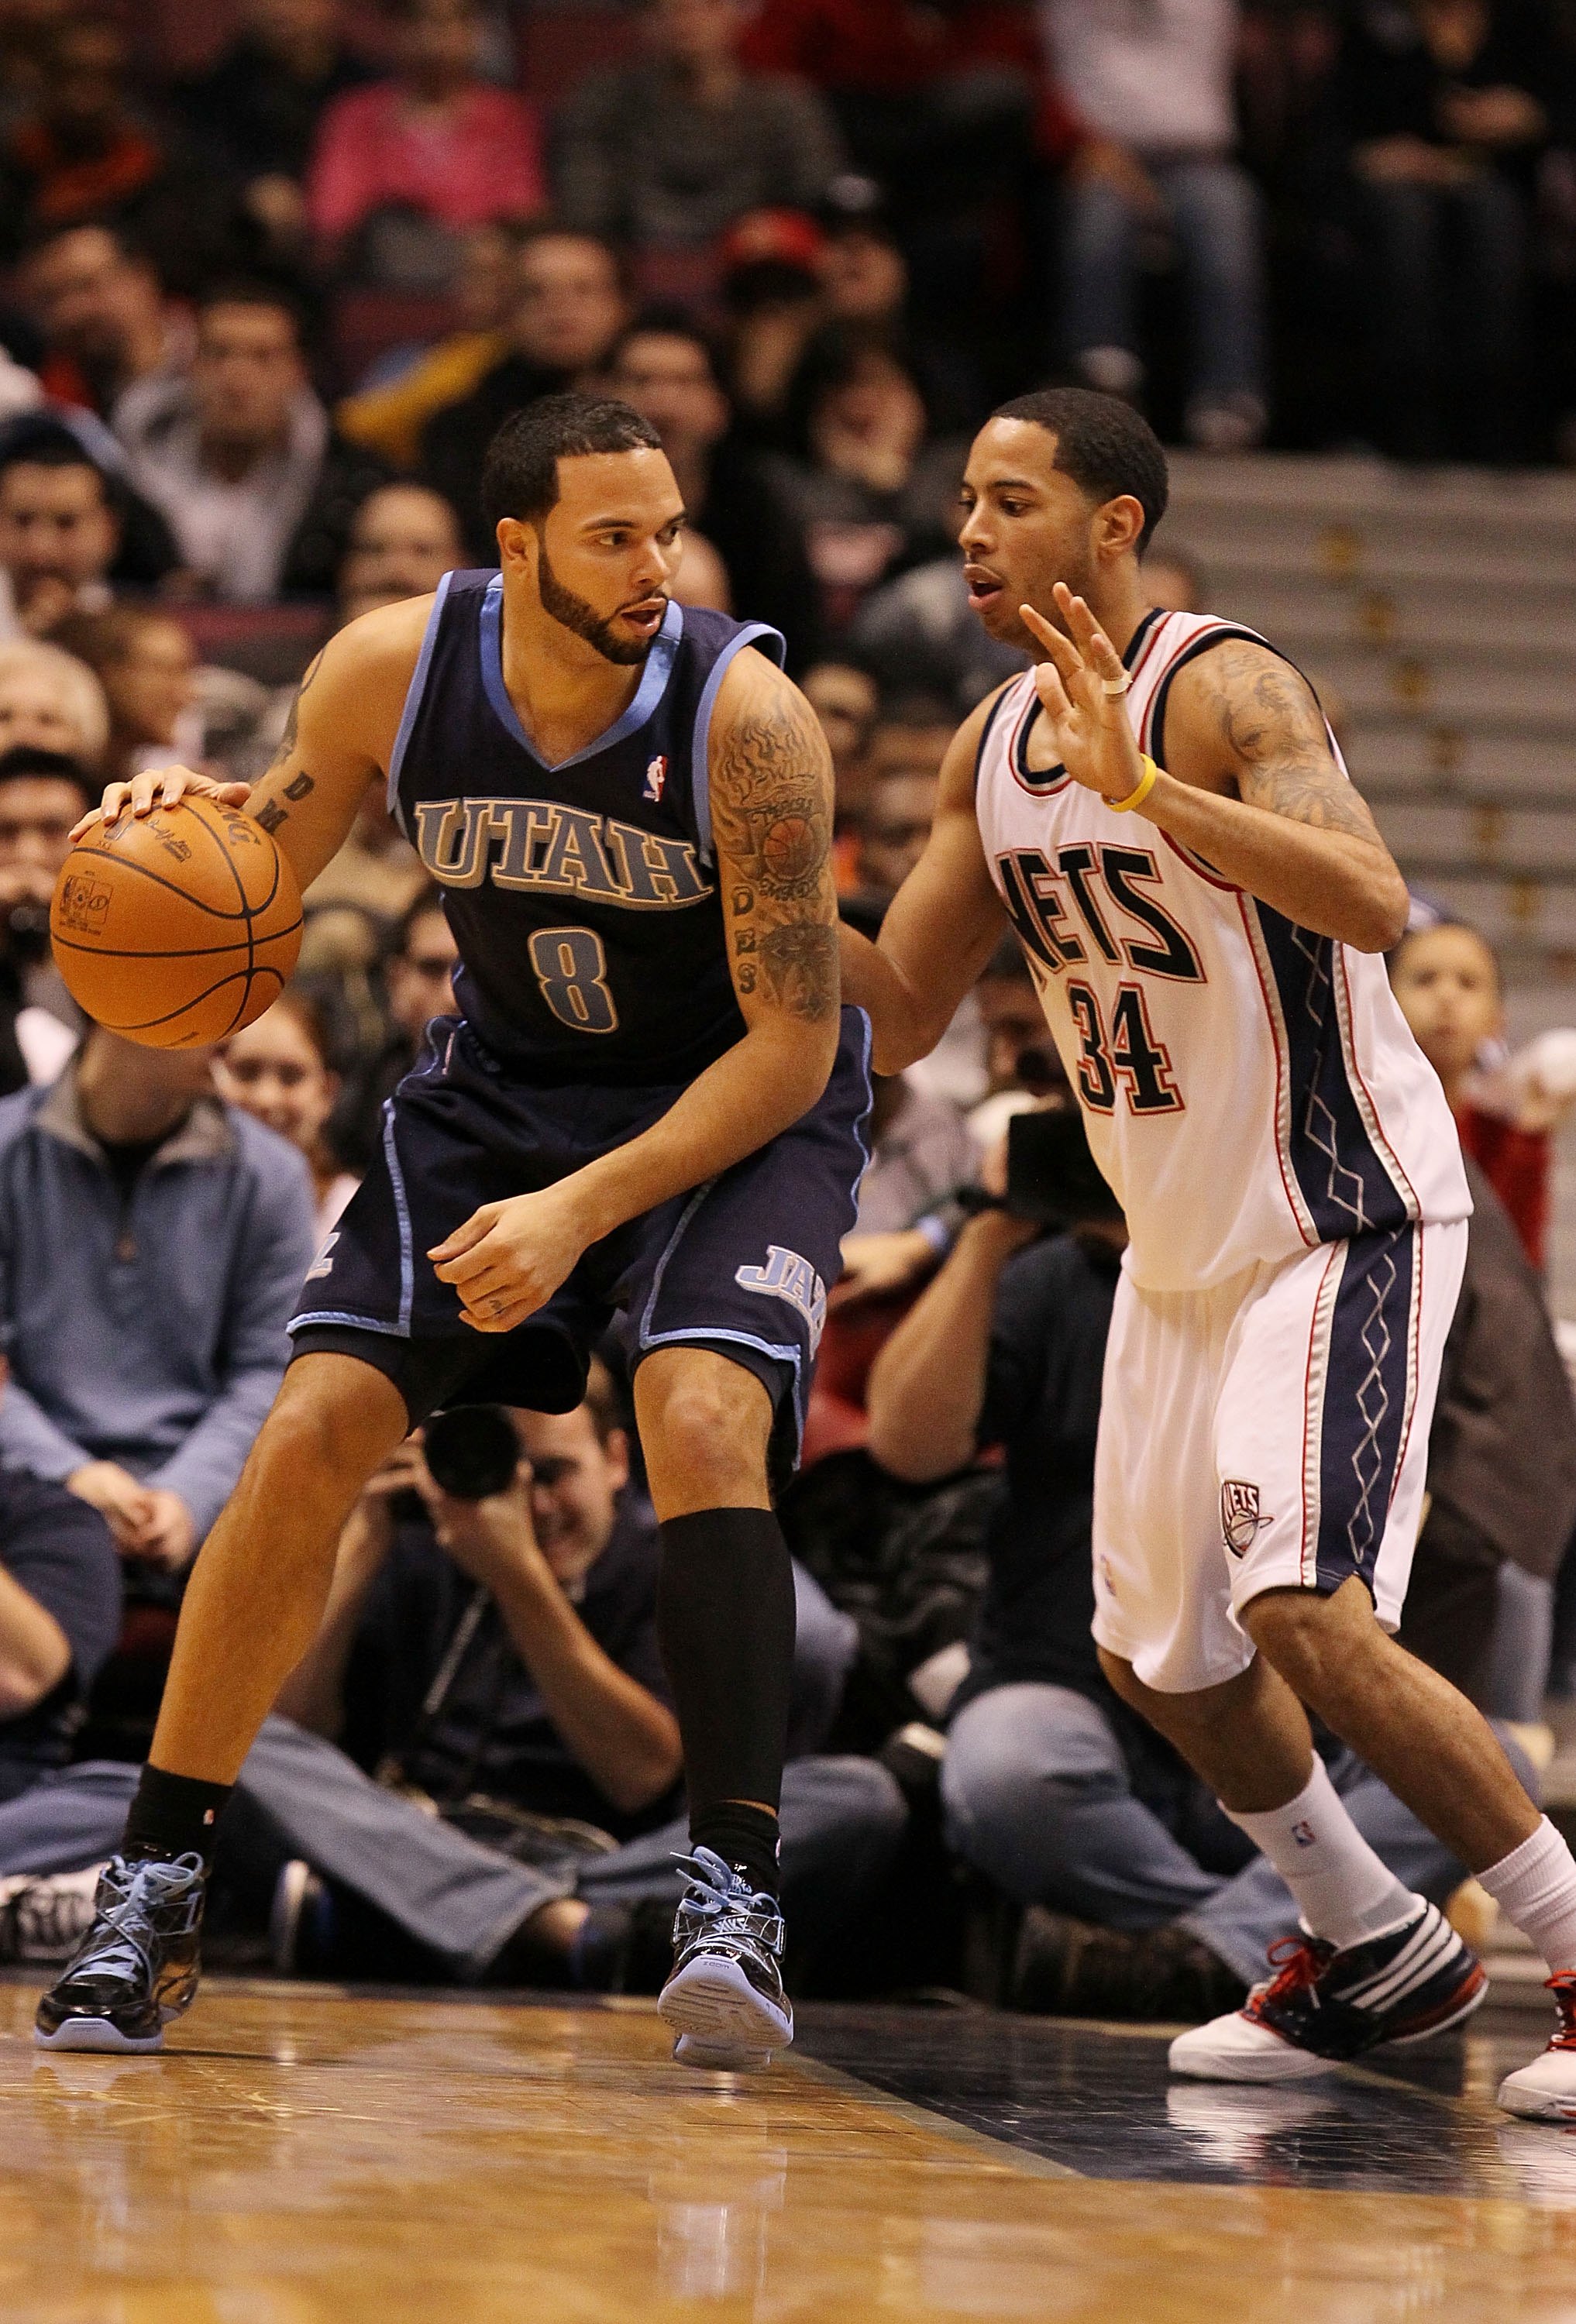 Nets land point guard Deron Williams from the Utah Jazz in exchange for  Devin Harris, Derrick Favors – New York Daily News